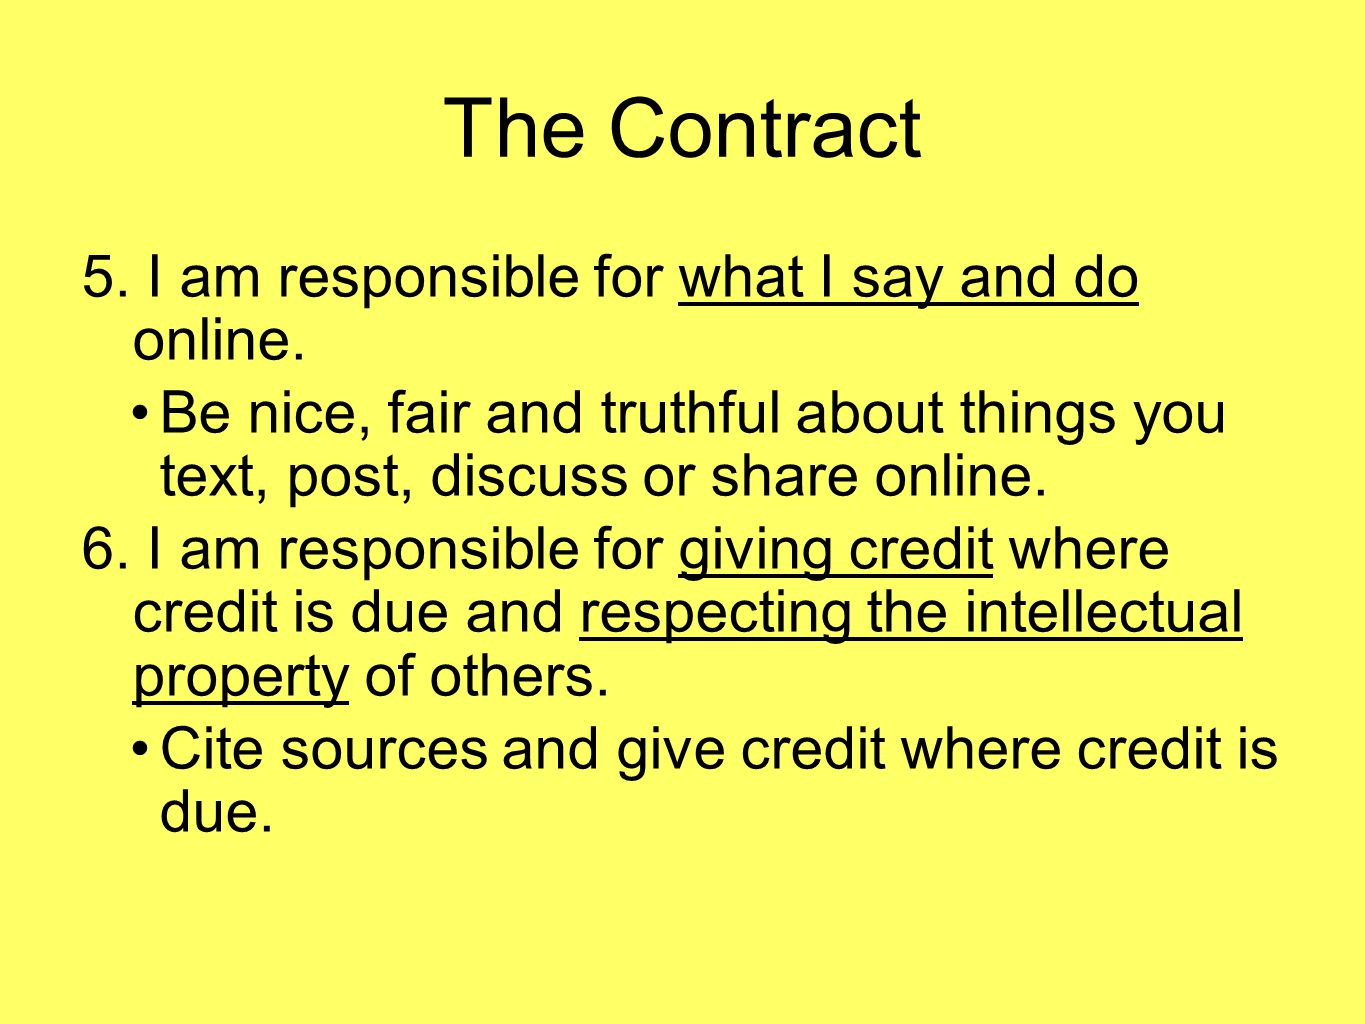 The Contract 5. I am responsible for what I say and do online.